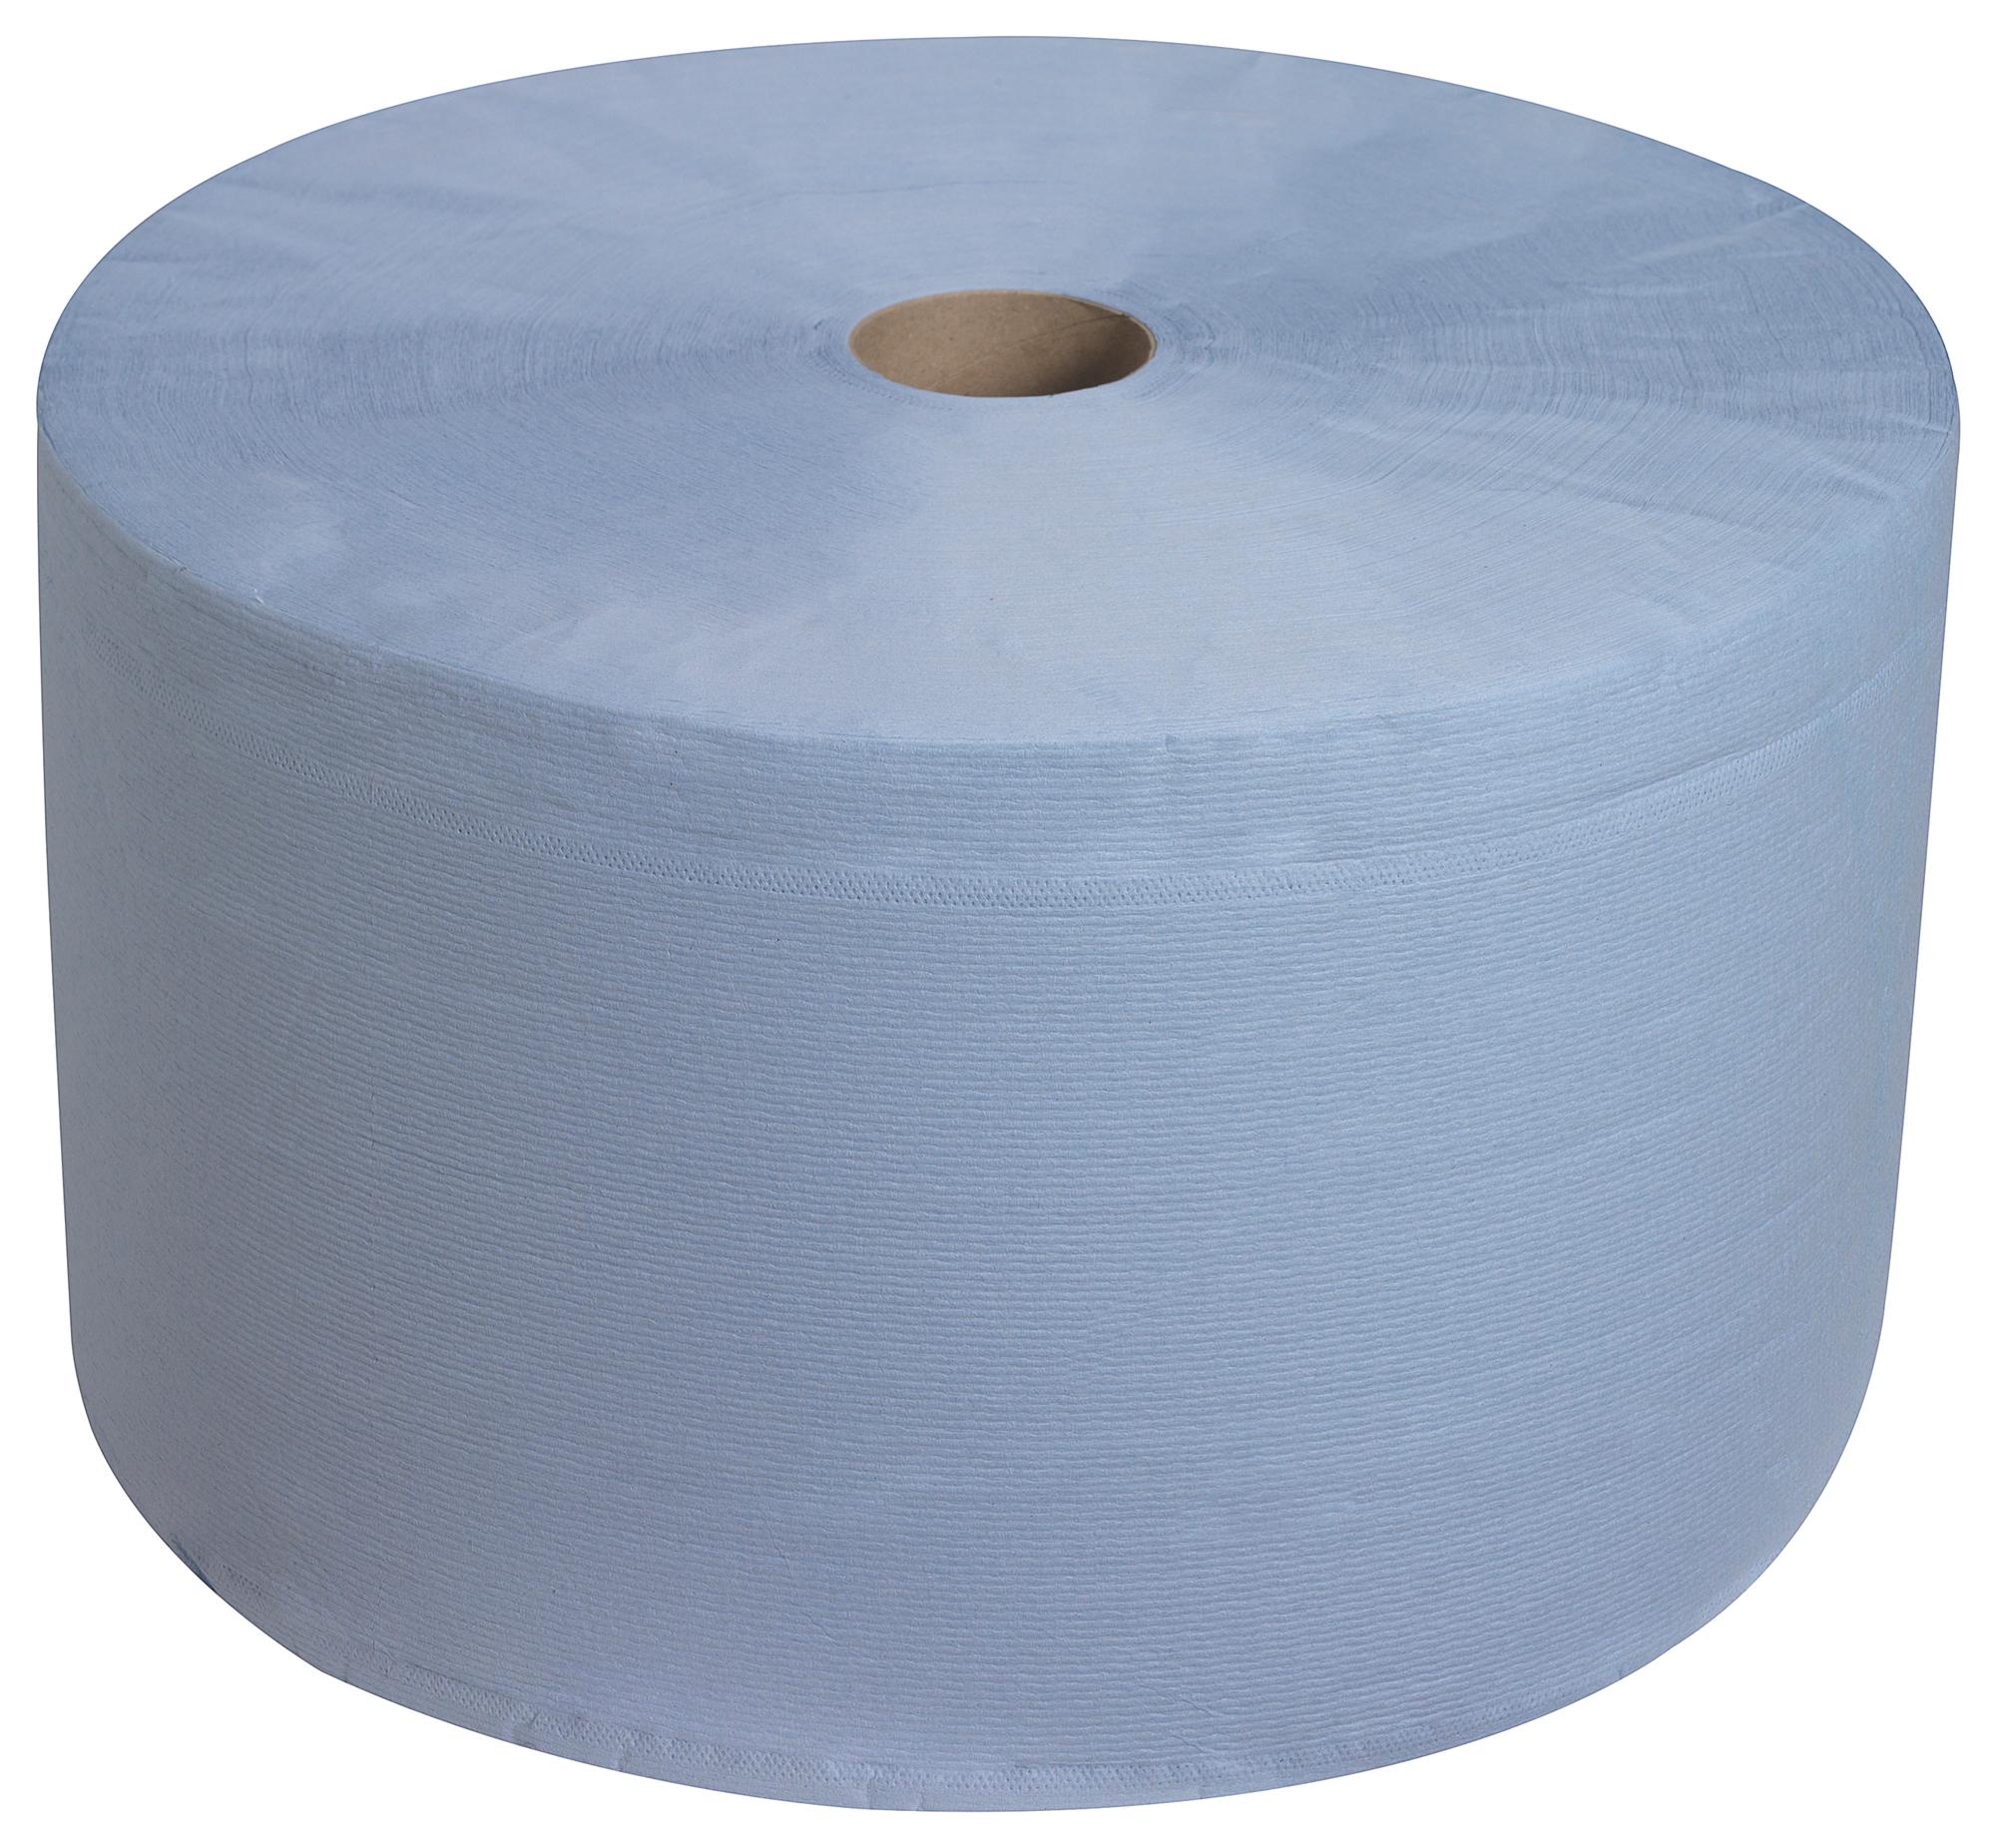 7425 WYPALL L30 WIPERS LARGE ROLL KIMBERLY CLARK